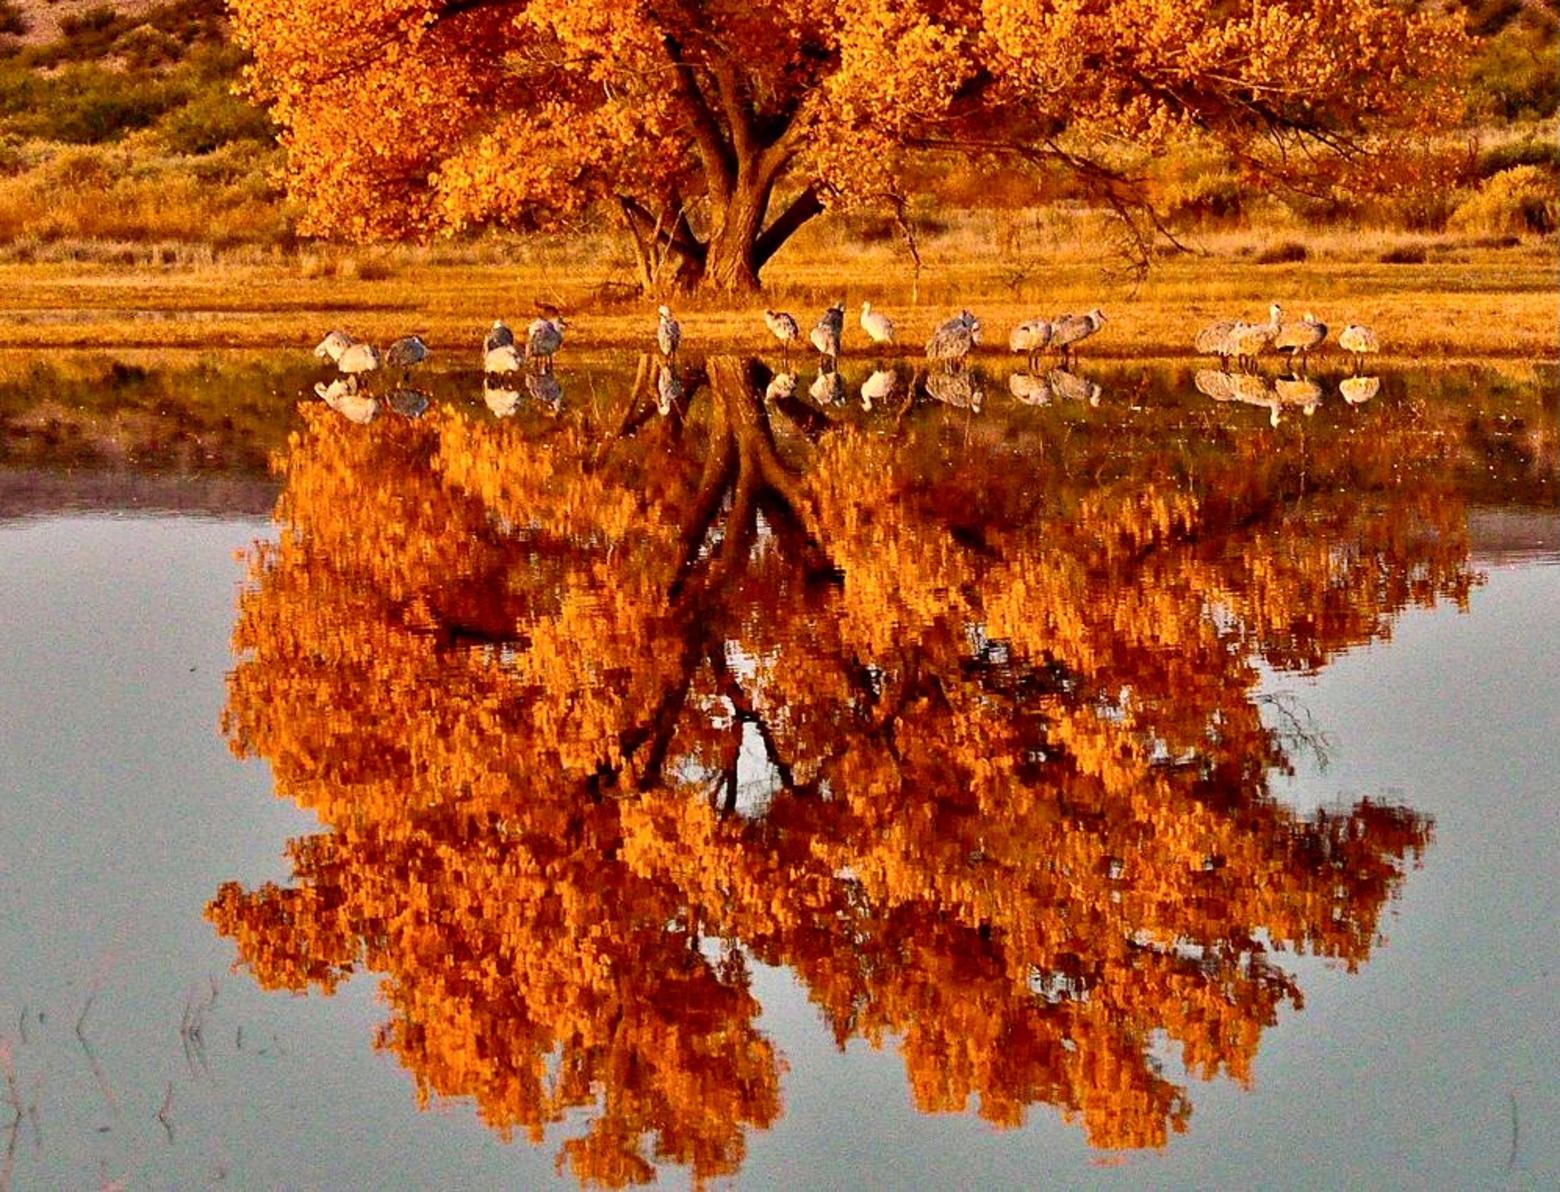 Sandhill cranes that have headed south to avoid the northern winter gather beneath a cottonwood tree whose final expression of color is reflected in the water.  Photo courtesy Robert Dunn/Wikipedia